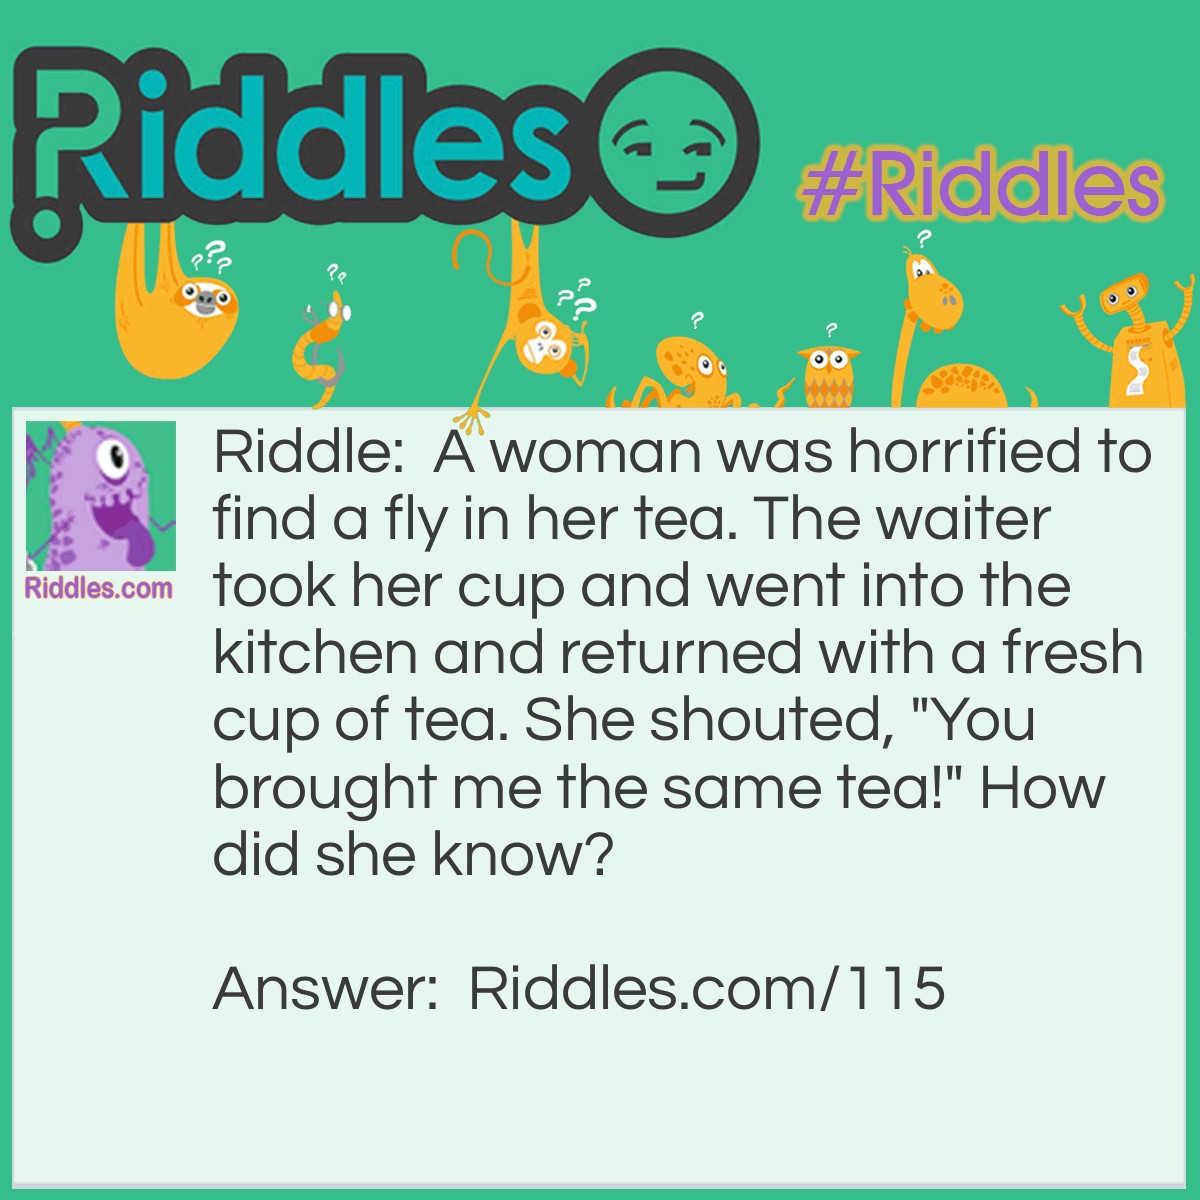 Riddle: A woman was horrified to find a fly in her tea. The waiter took her cup and went into the kitchen and returned with a fresh cup of tea. She shouted, "You brought me the same tea!" How did she know? Answer: She had already put sugar in it and when she tasted the new tea it was already sweet.